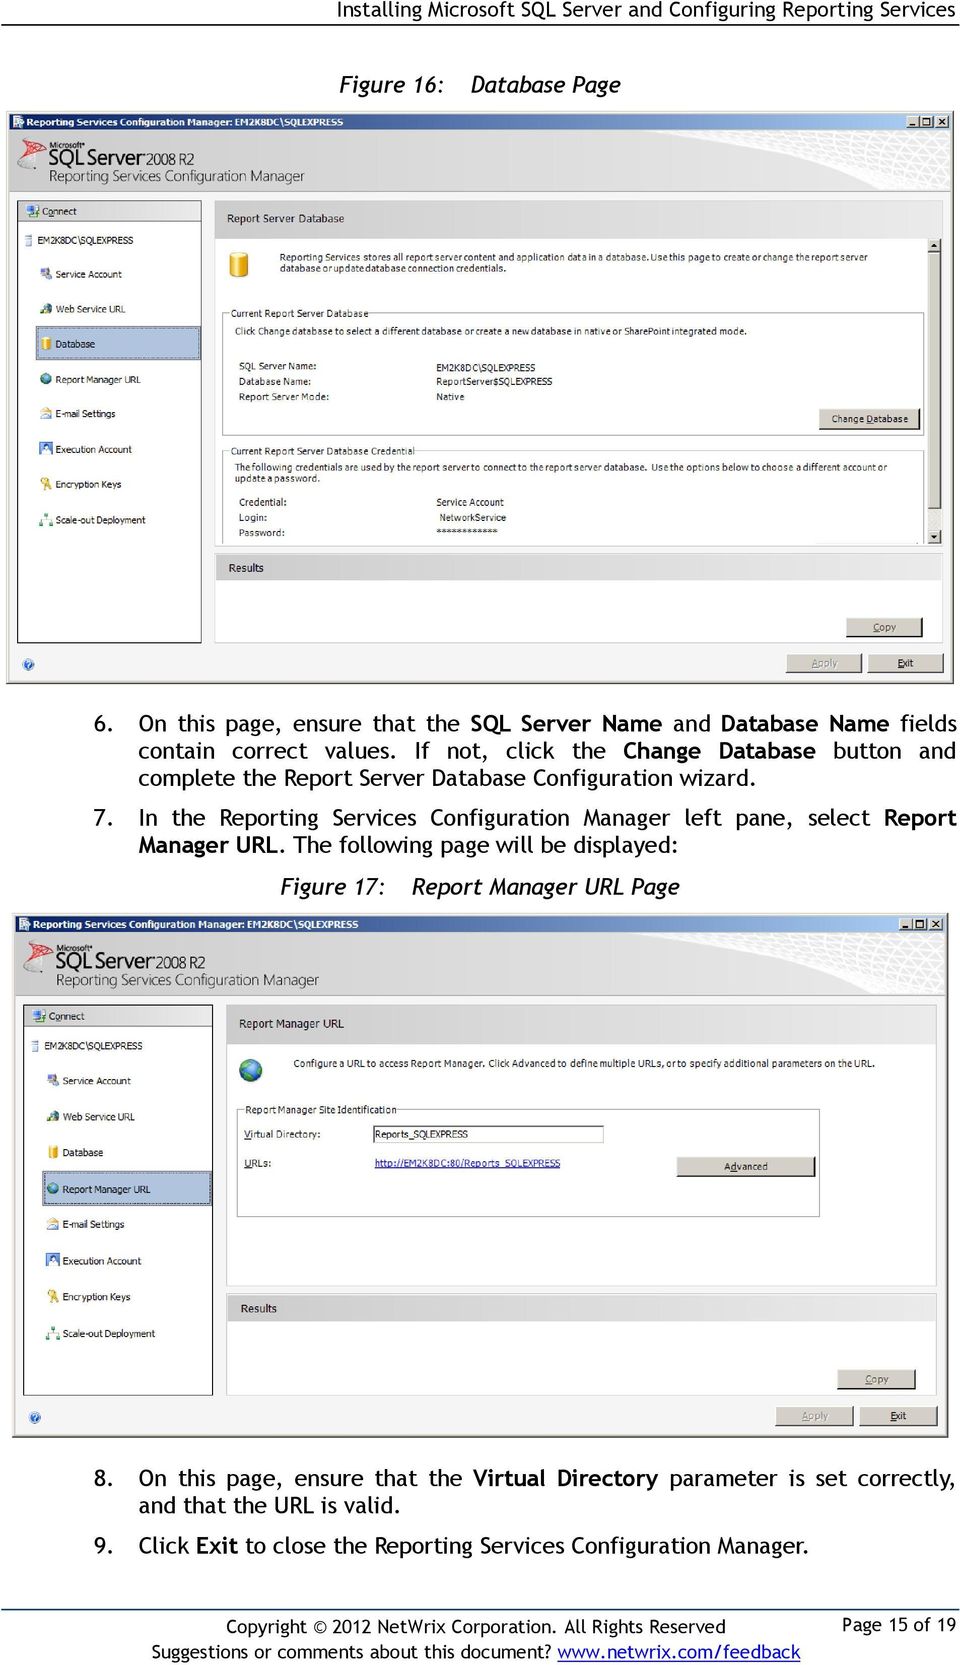 In the Reporting Services Configuration Manager left pane, select Report Manager URL.